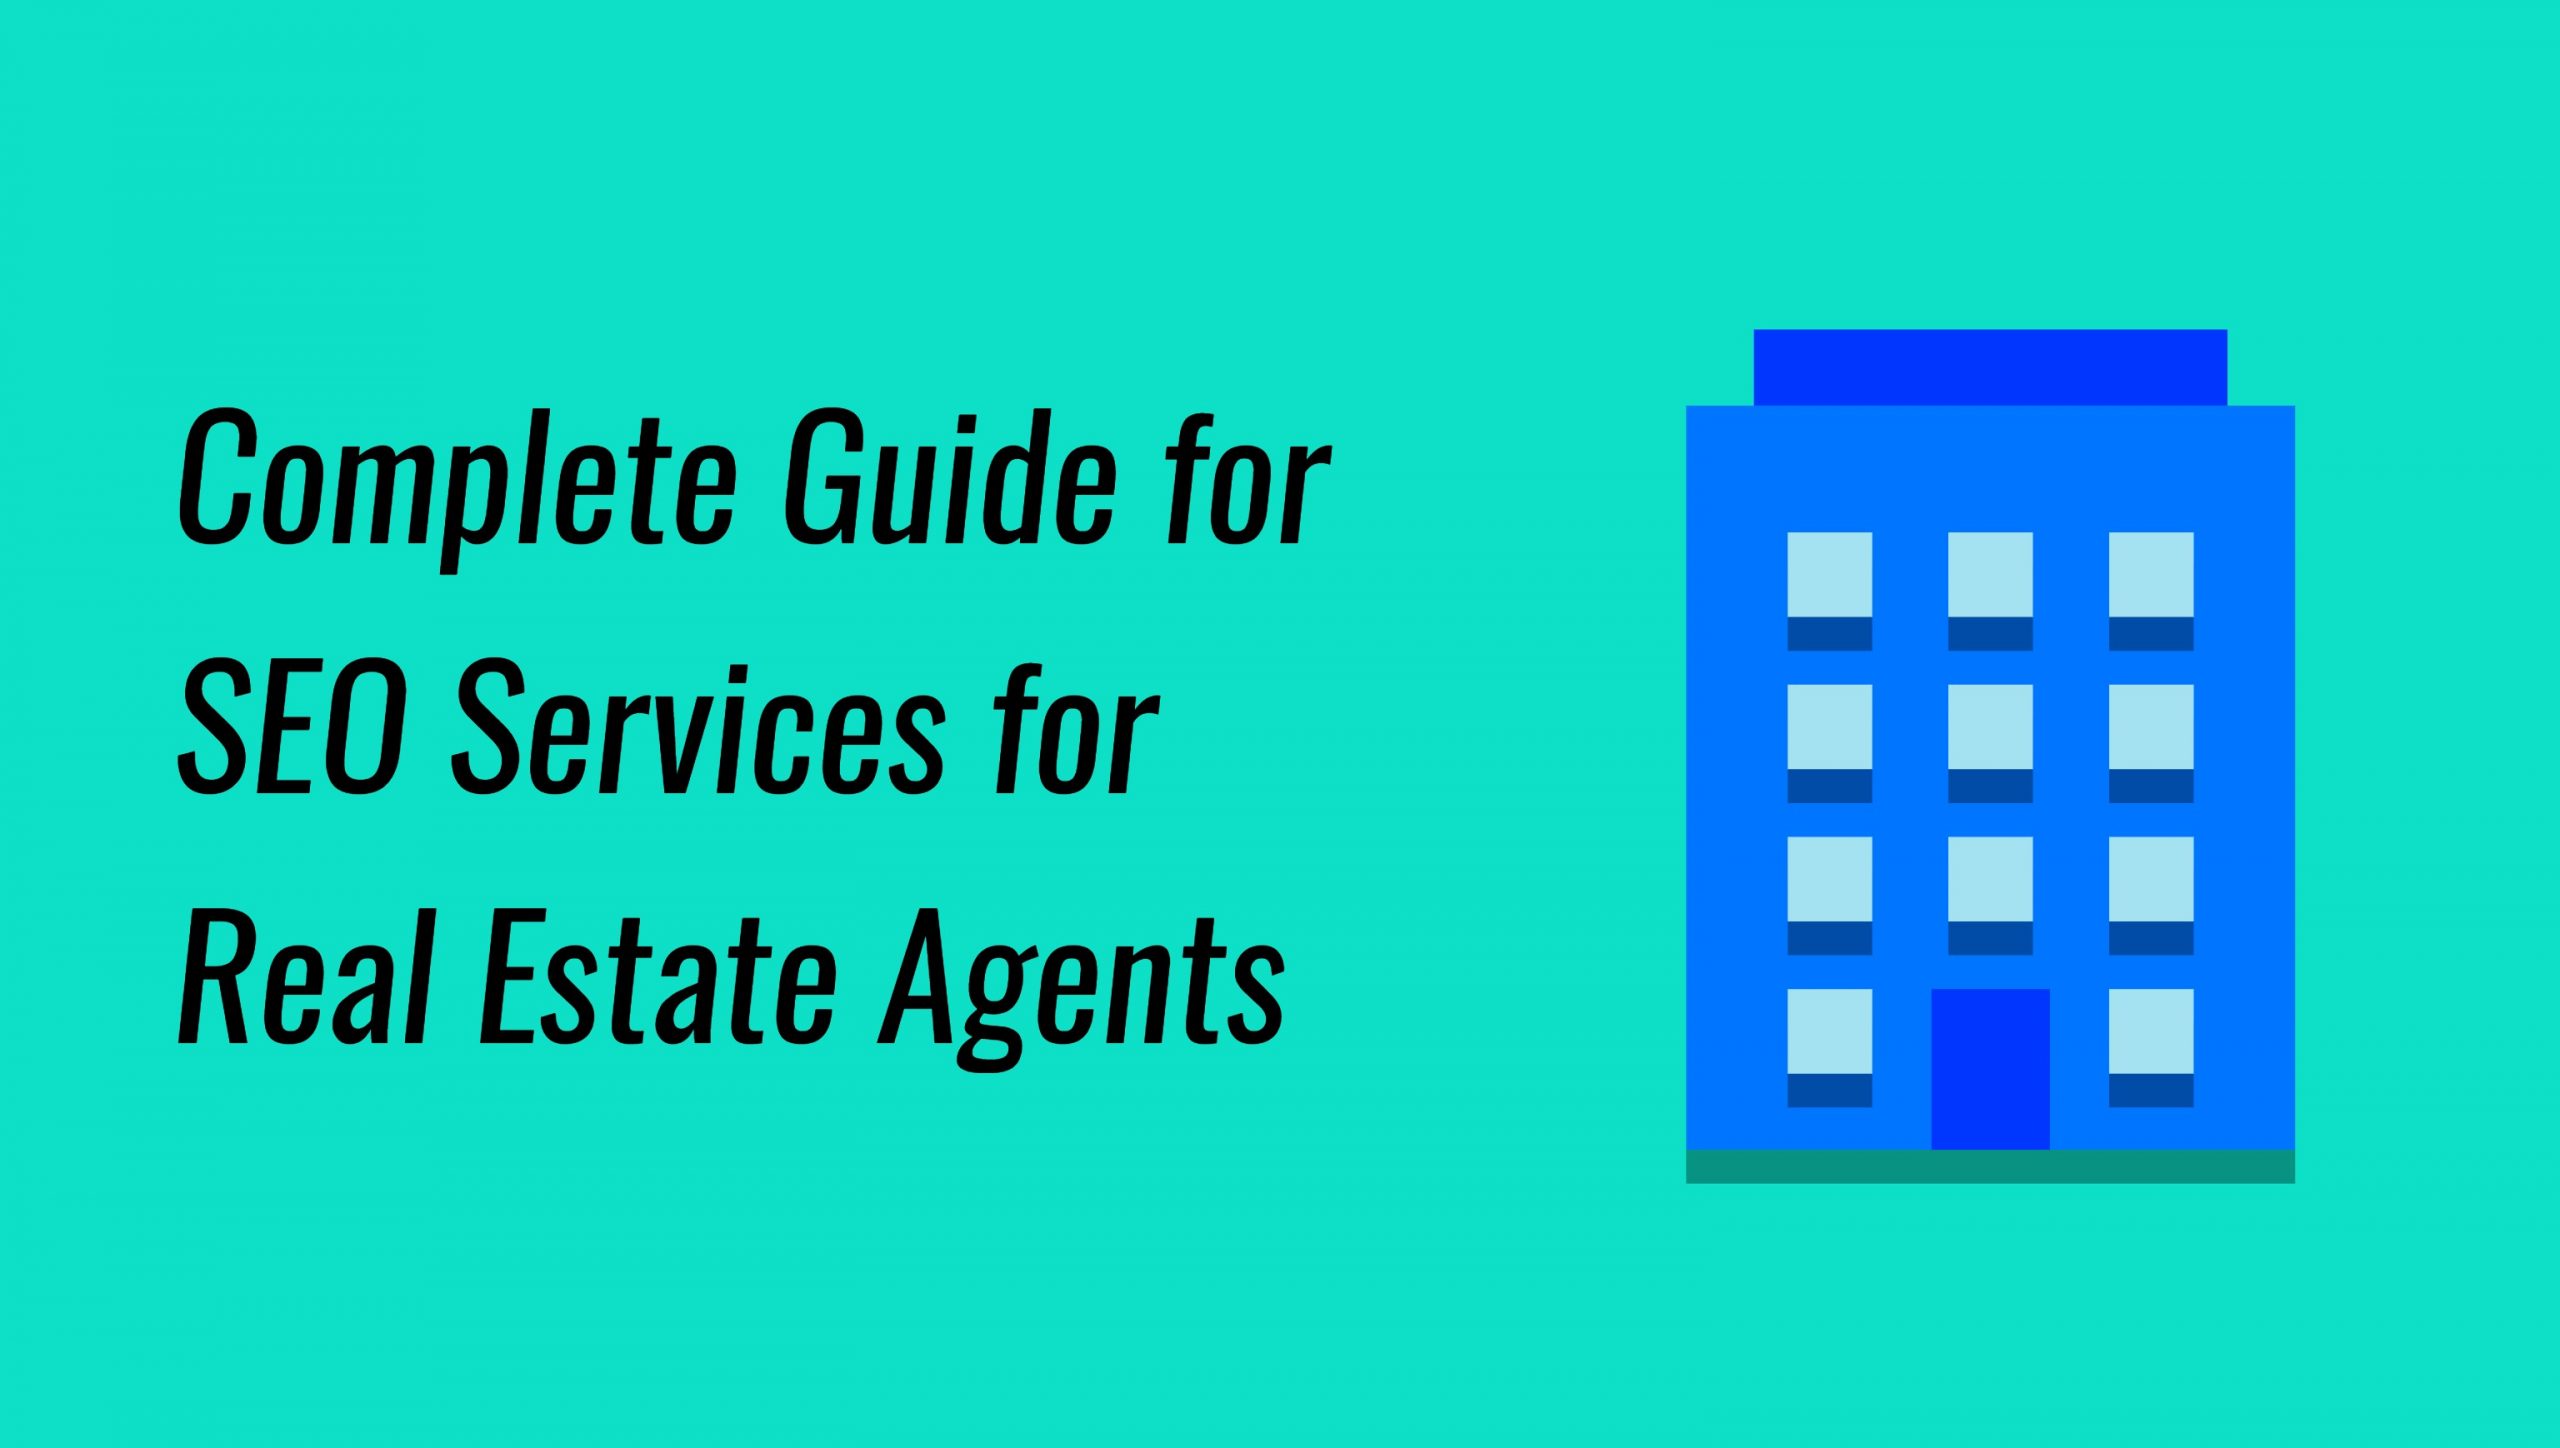 SEO Services for Real Estate Agents